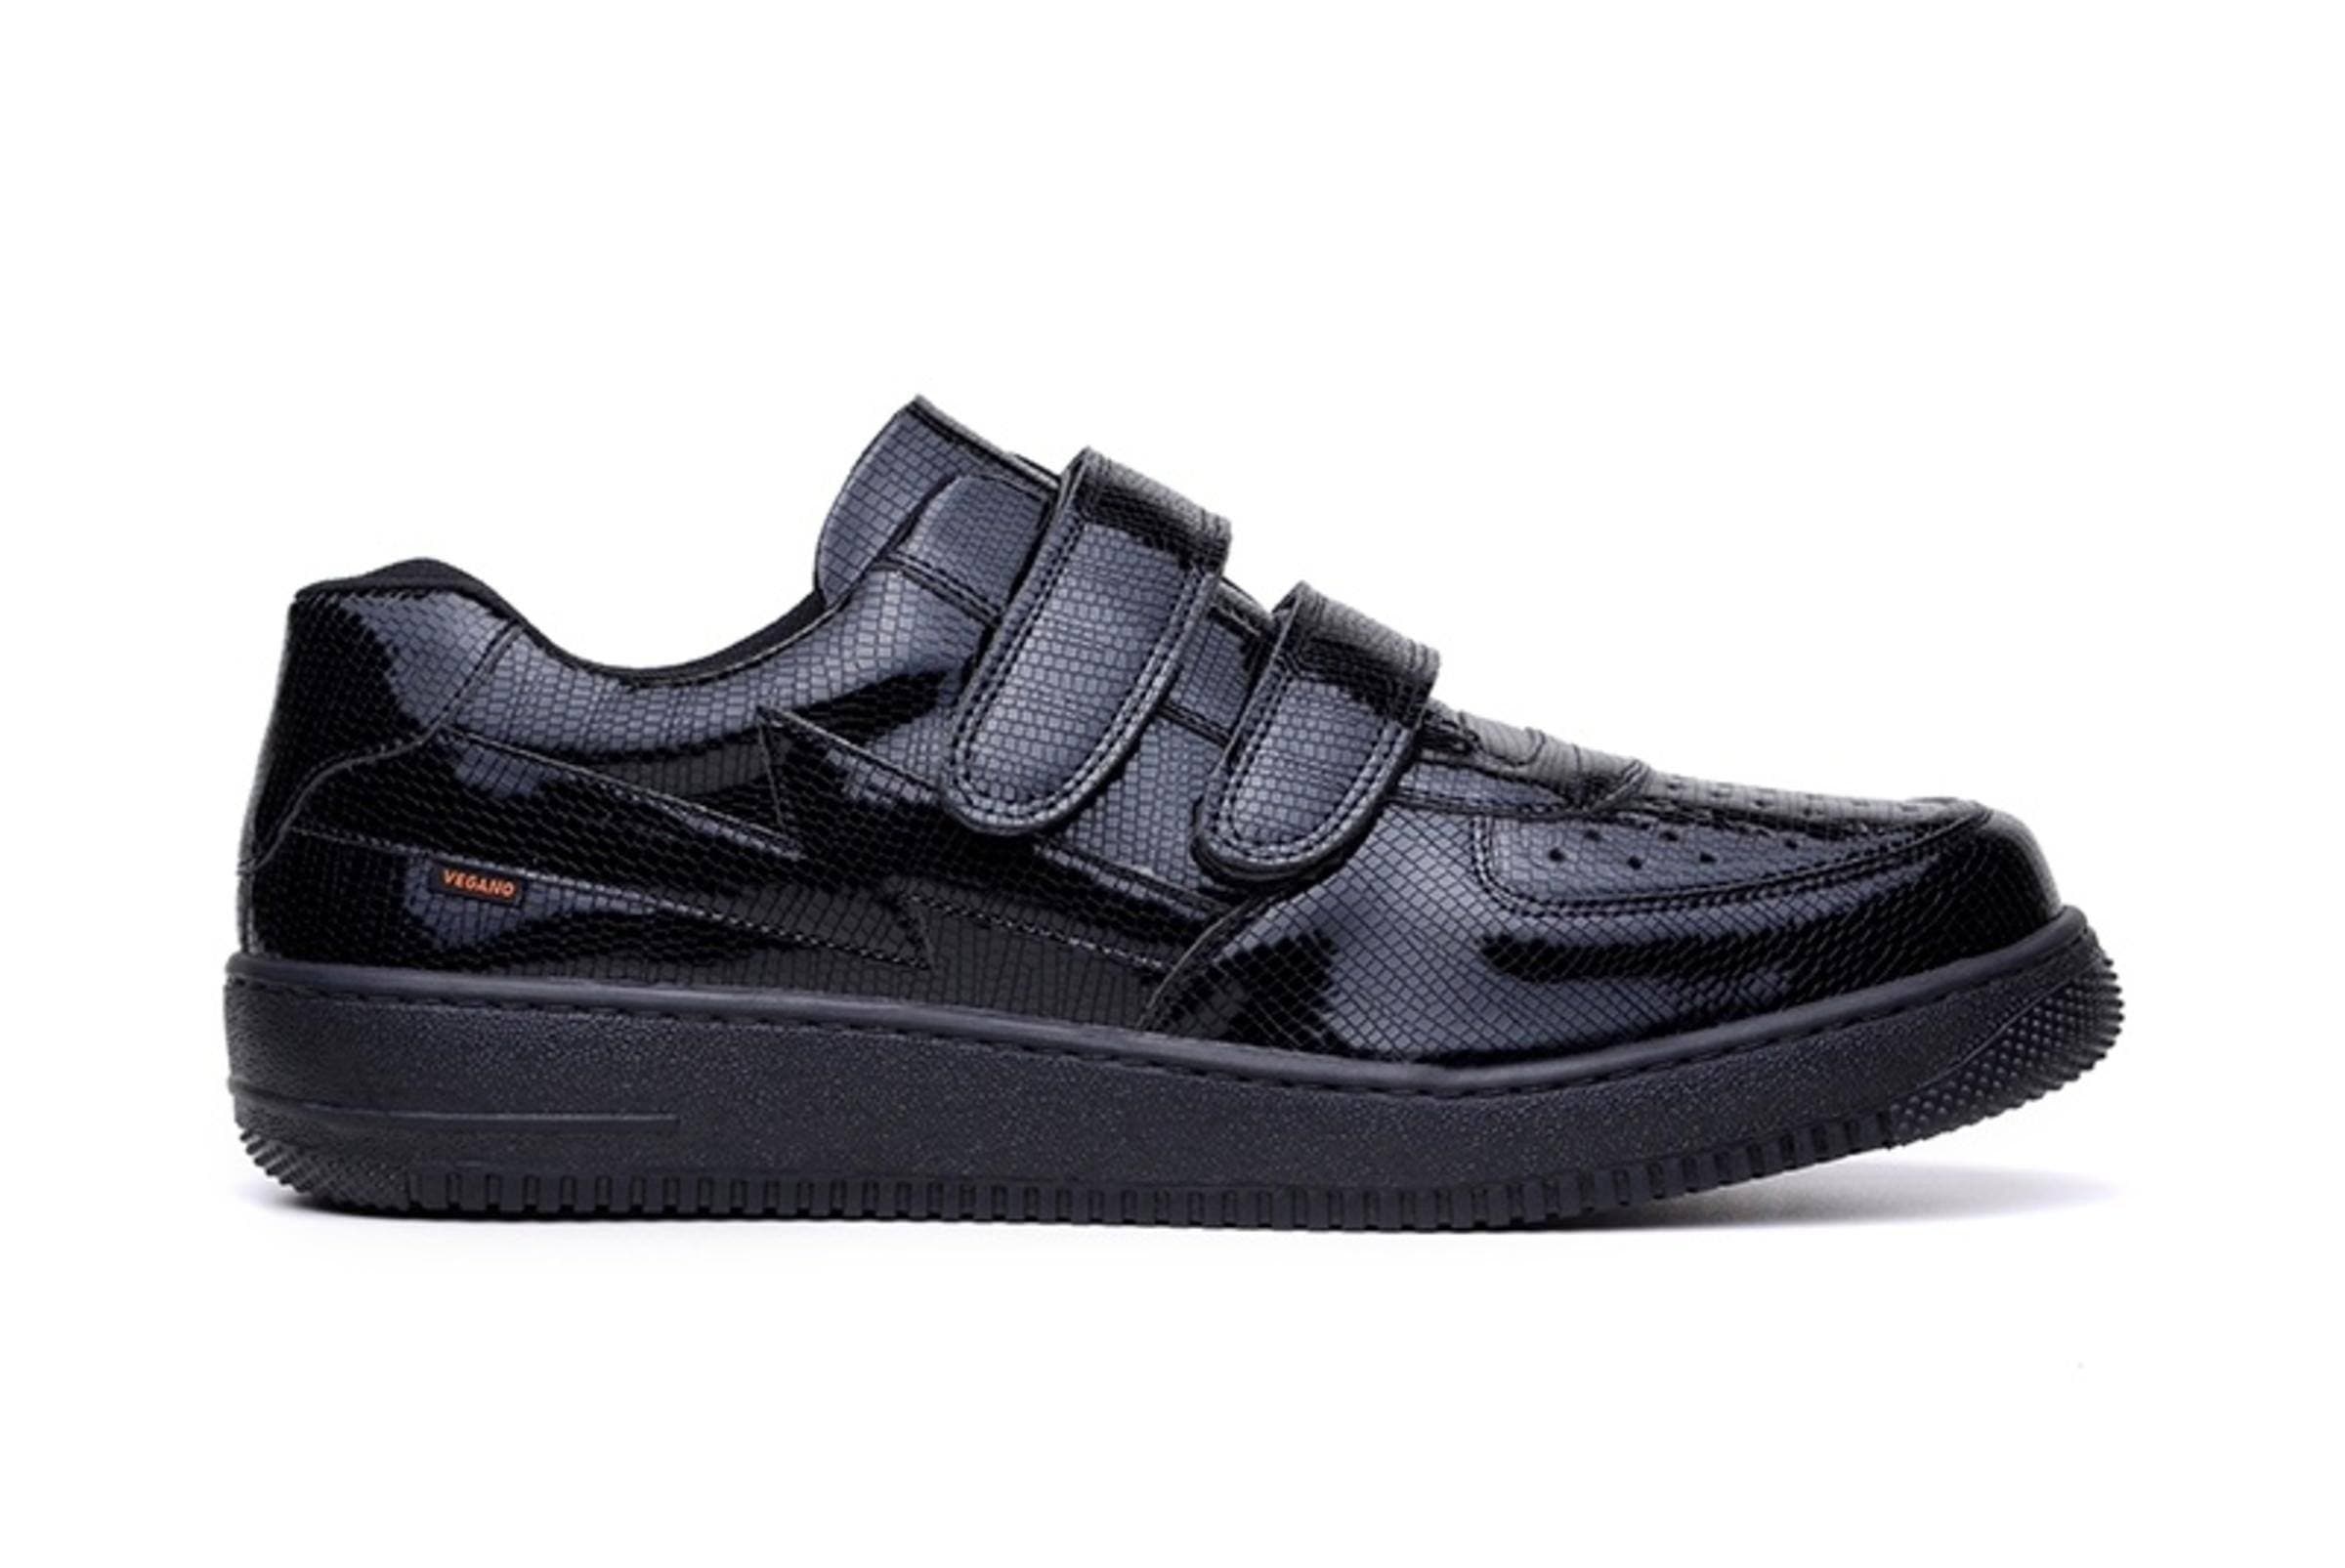 'Paramount' vegan low-top sneaker with velcro straps by King55 - black ...